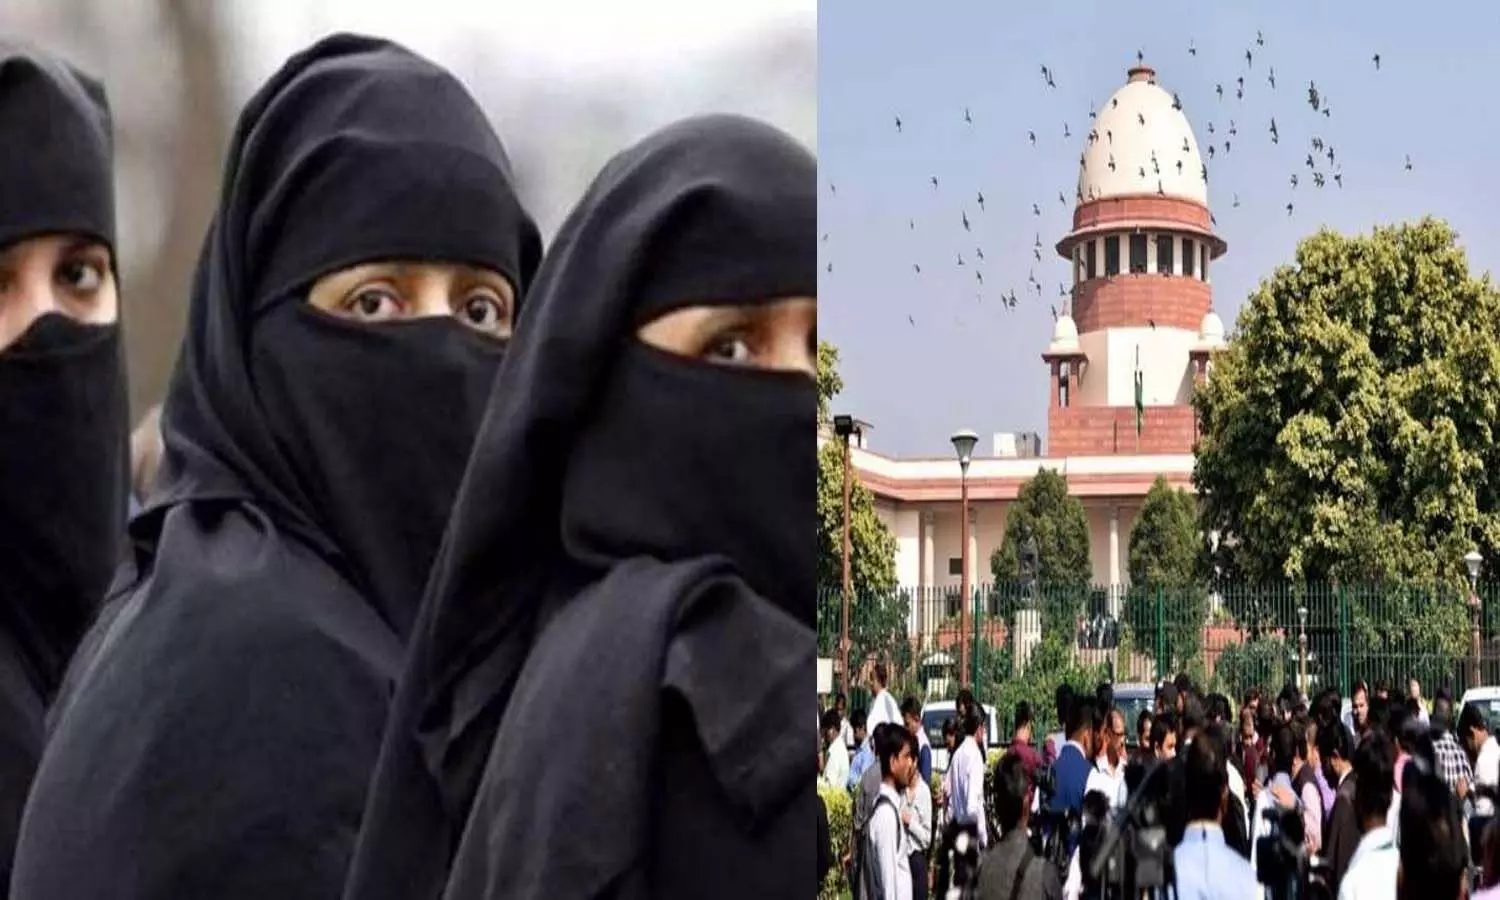 Drop out of Muslim girl students increased due to hijab ban, Supreme Court asked for data